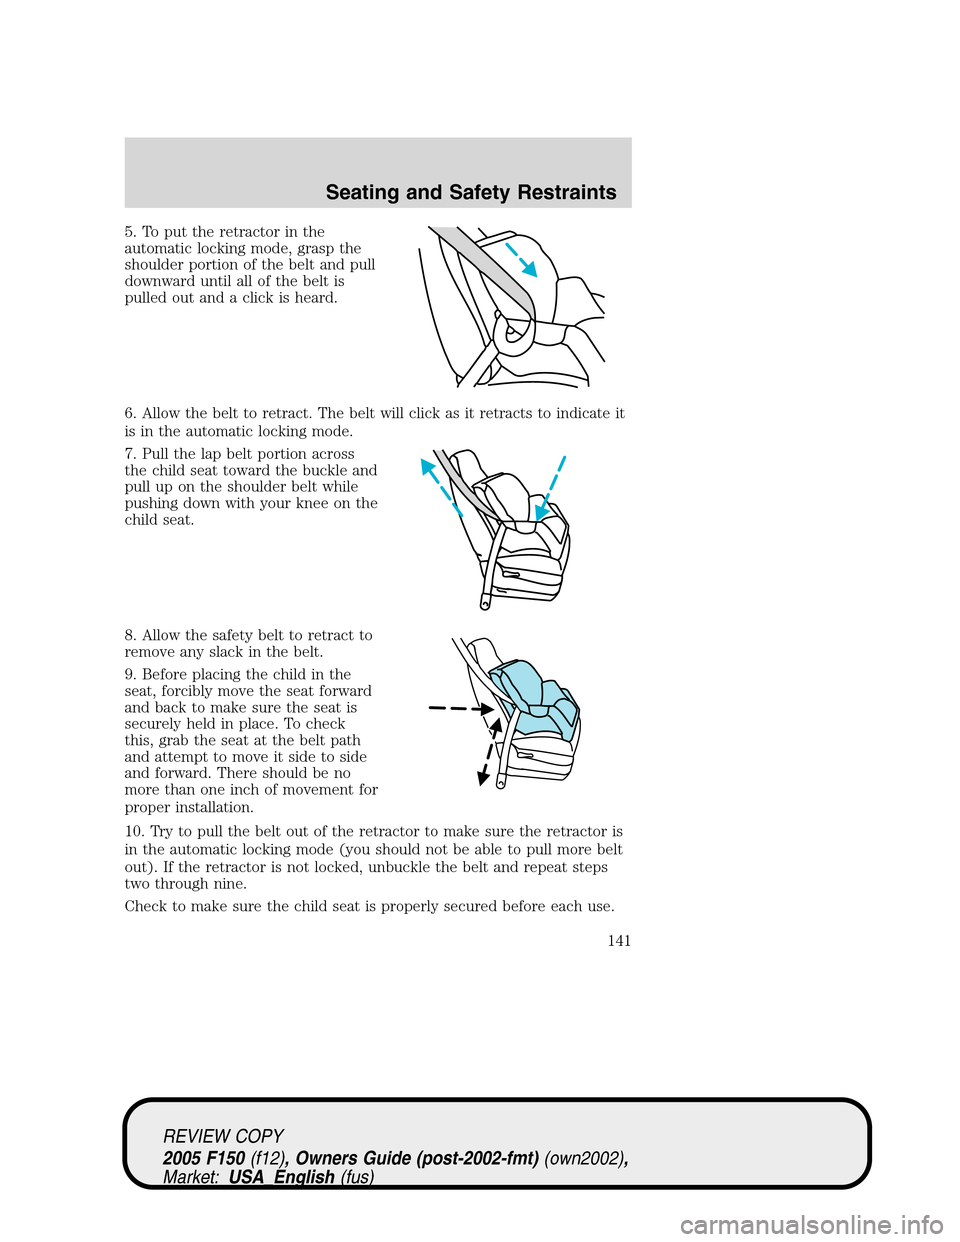 FORD F150 2005 11.G Owners Manual 5. To put the retractor in the
automatic locking mode, grasp the
shoulder portion of the belt and pull
downward until all of the belt is
pulled out and a click is heard.
6. Allow the belt to retract. 